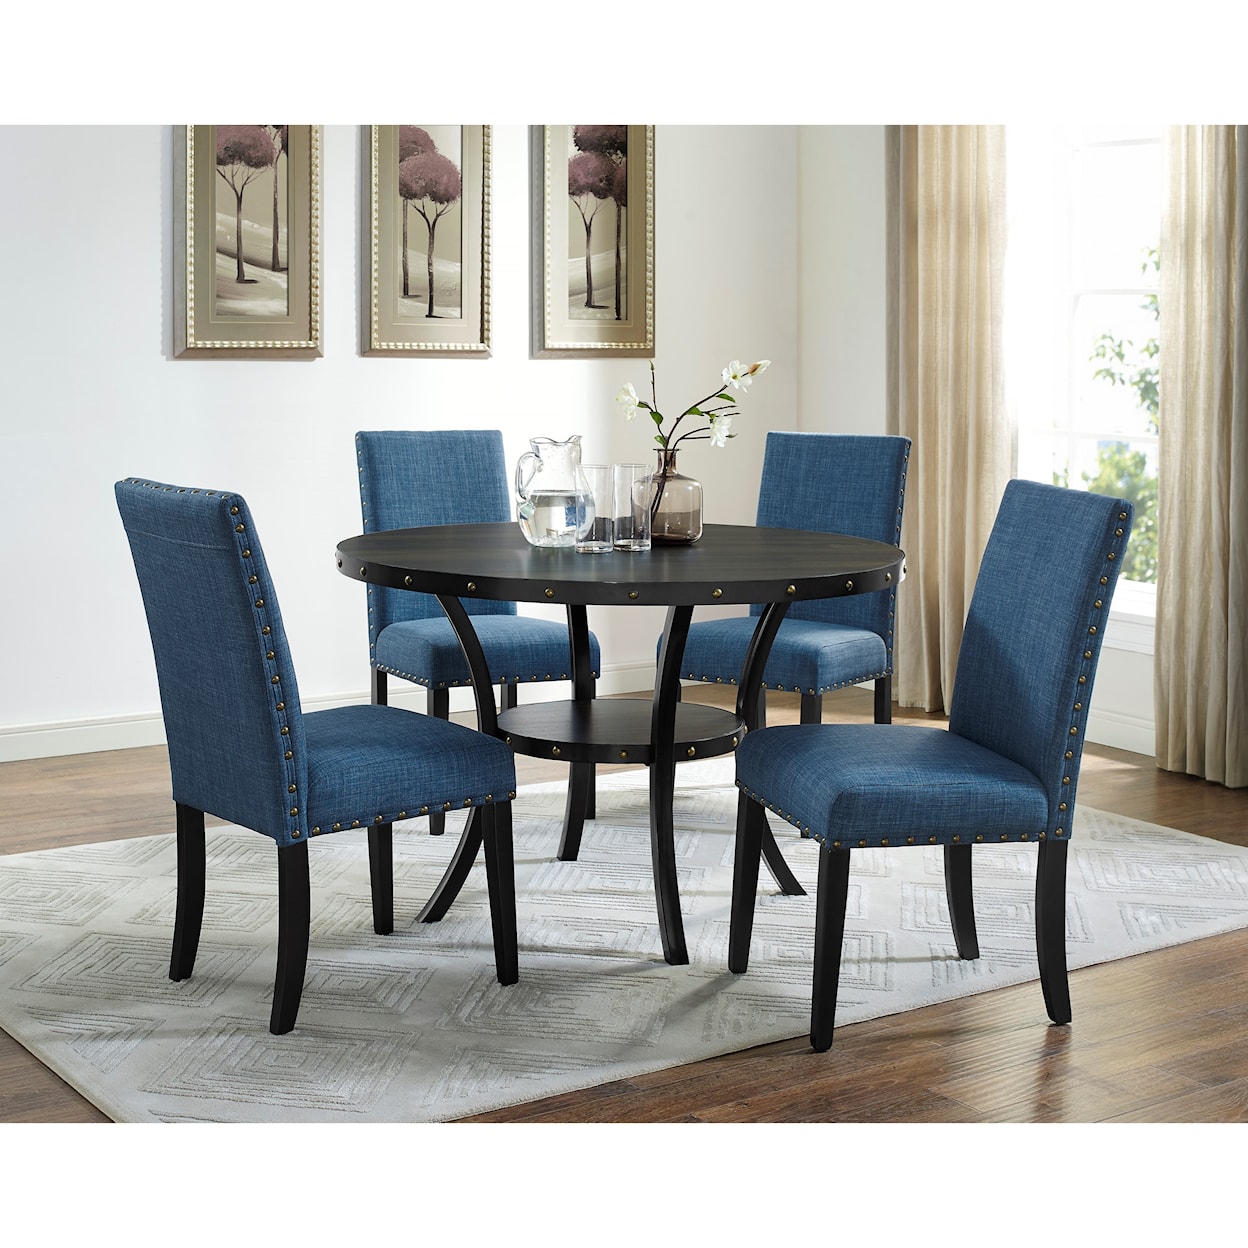 New Classic Crispin Dining Chair